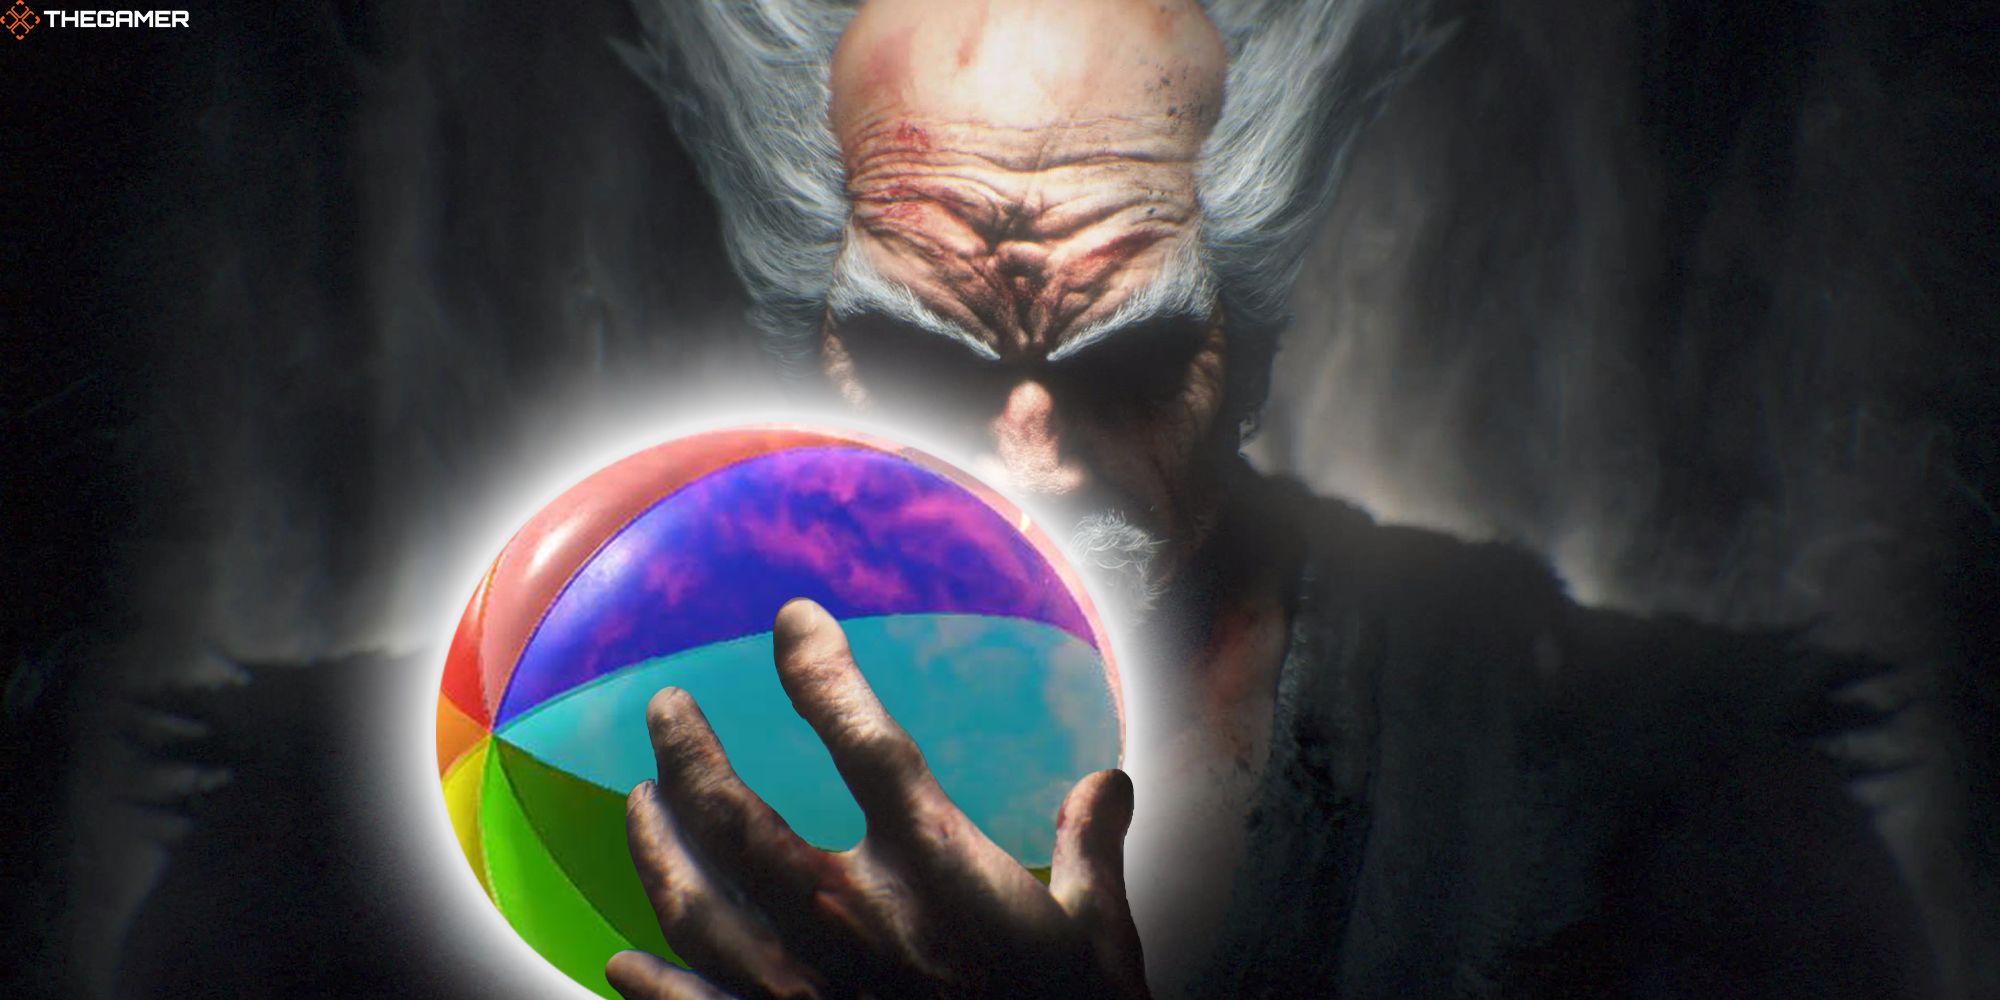 Heihachi Mishima holds a colorful beach ball from Tekken 8.